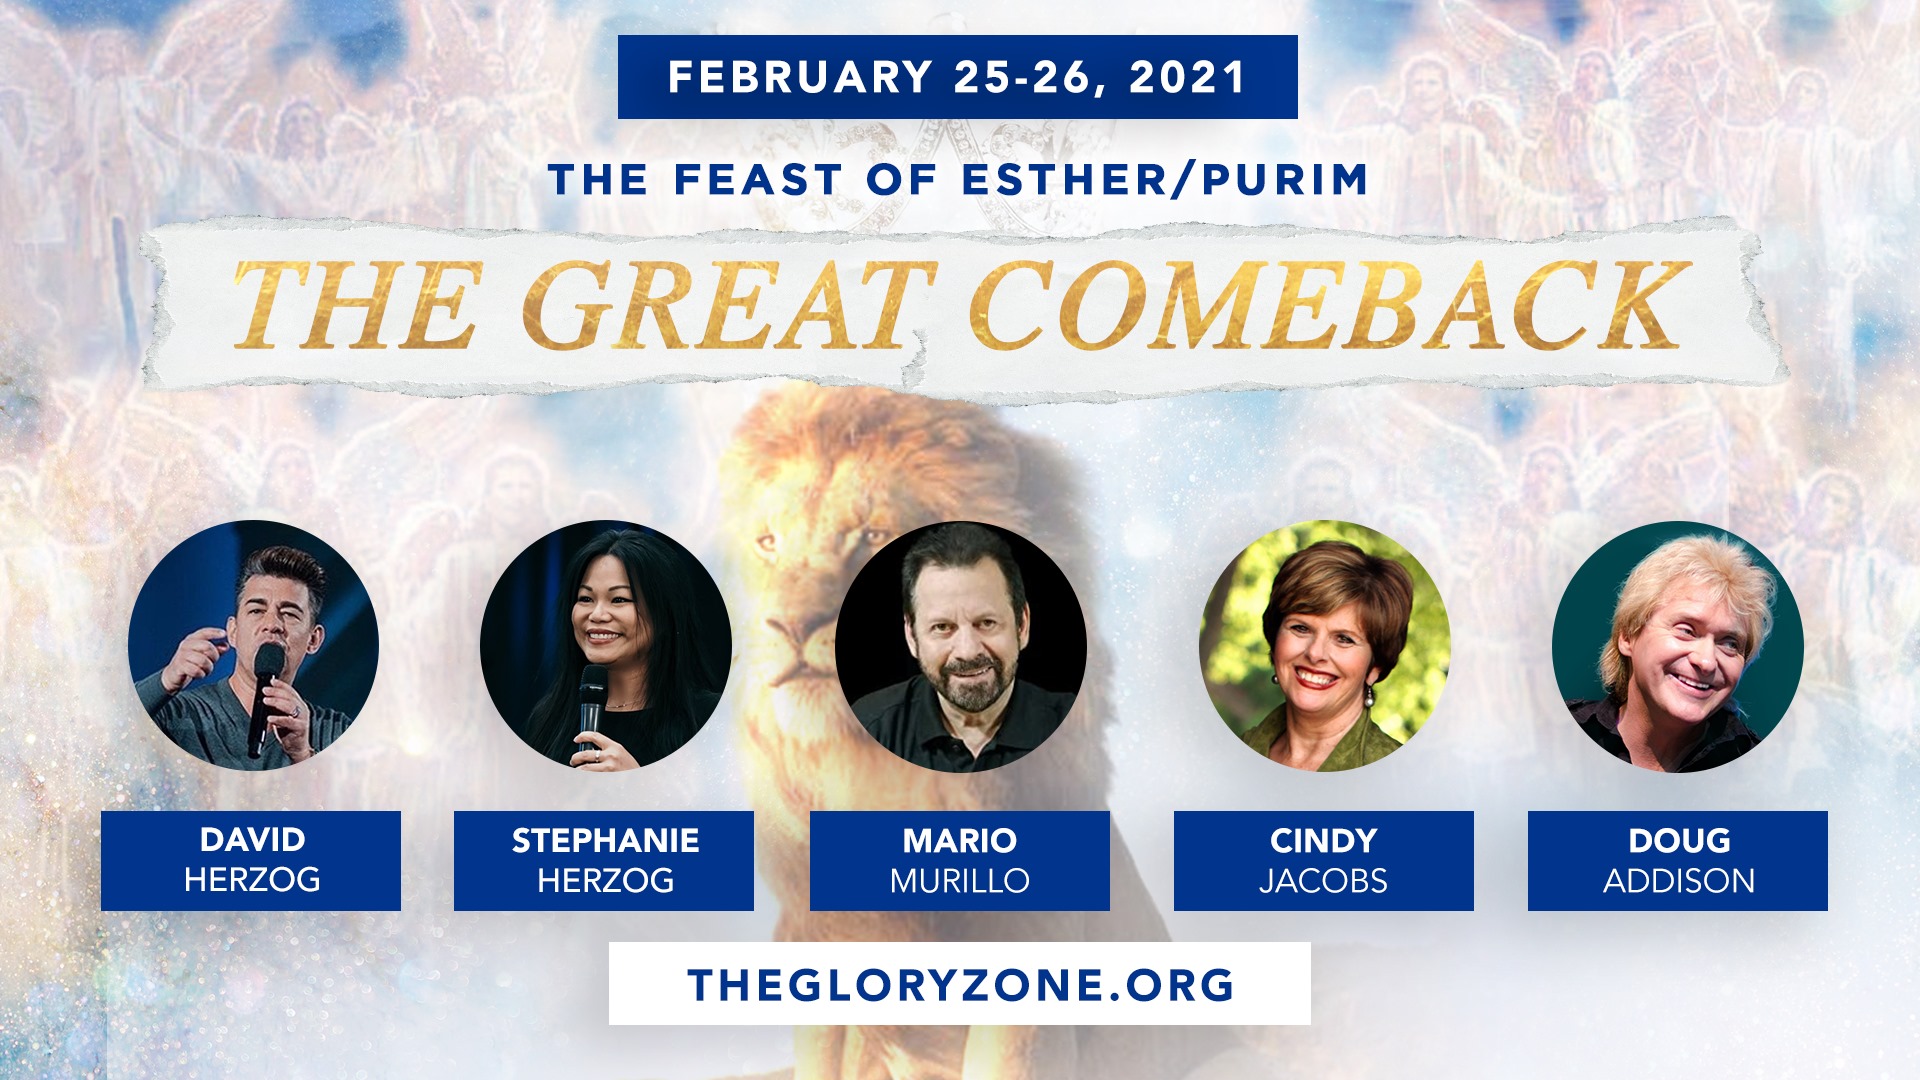 The Great Comeback - The Feast of Esther/Purim with David Herzog, Cindy Jacobs, Doug Addison and more.